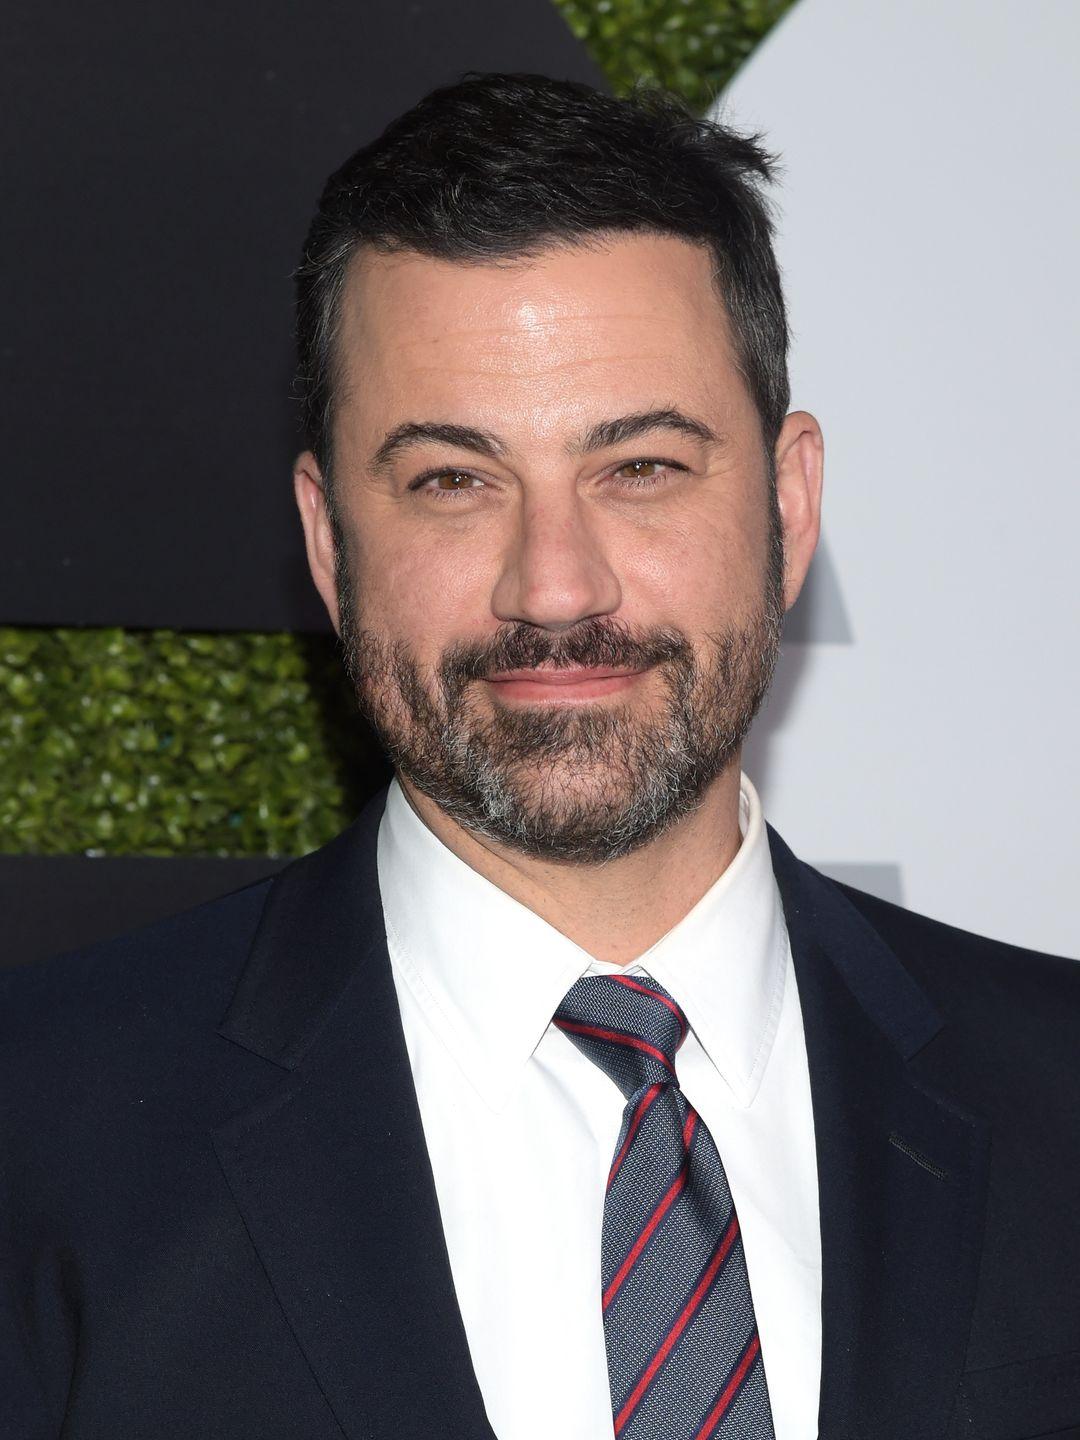 Jimmy Kimmel who is his mother